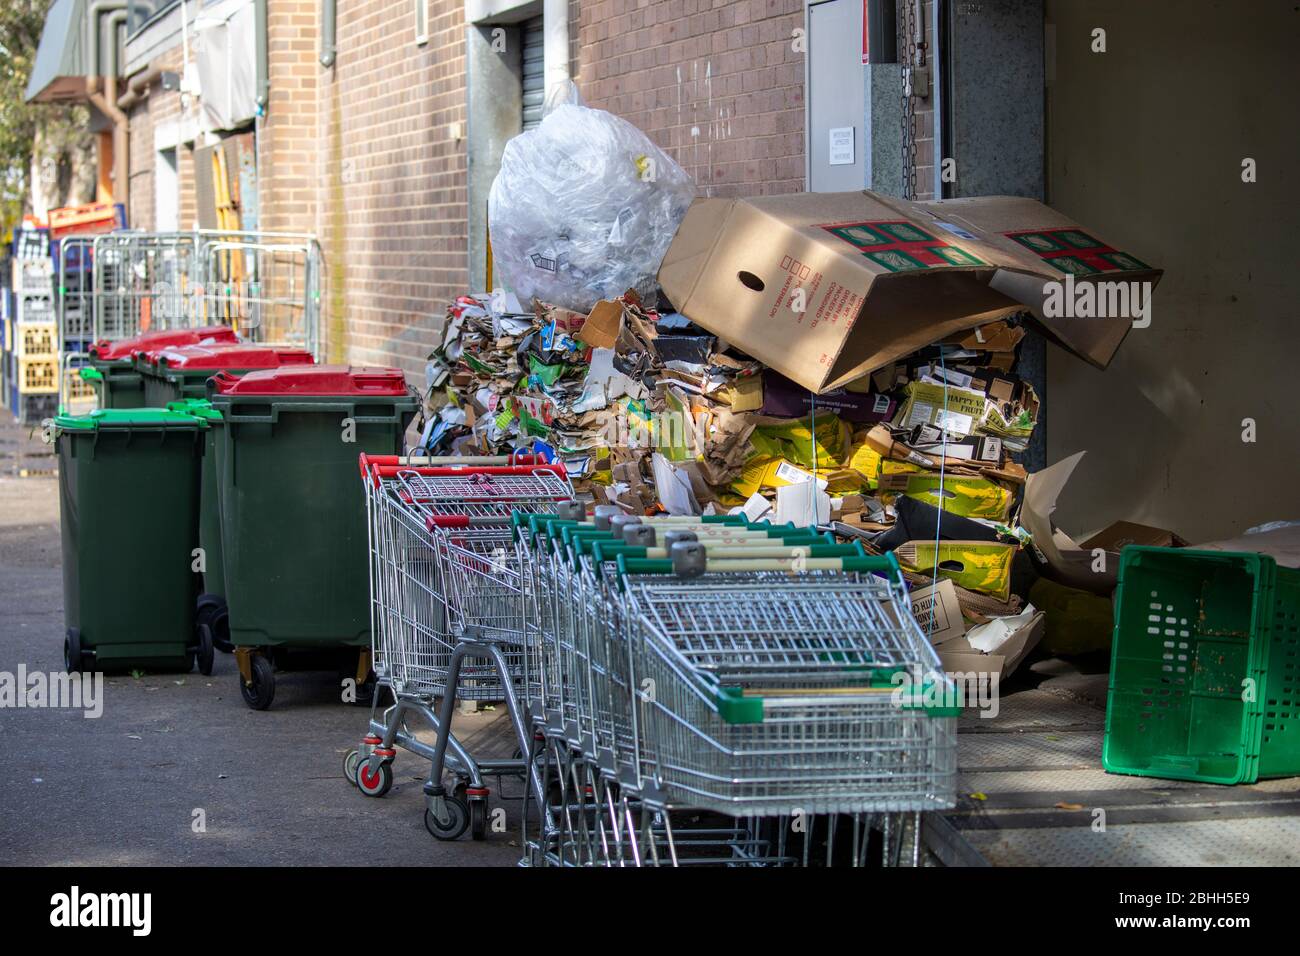 Australian supermarket cardboard and debris in the loading bay packaged up for disposal, Sydney,Australia Stock Photo